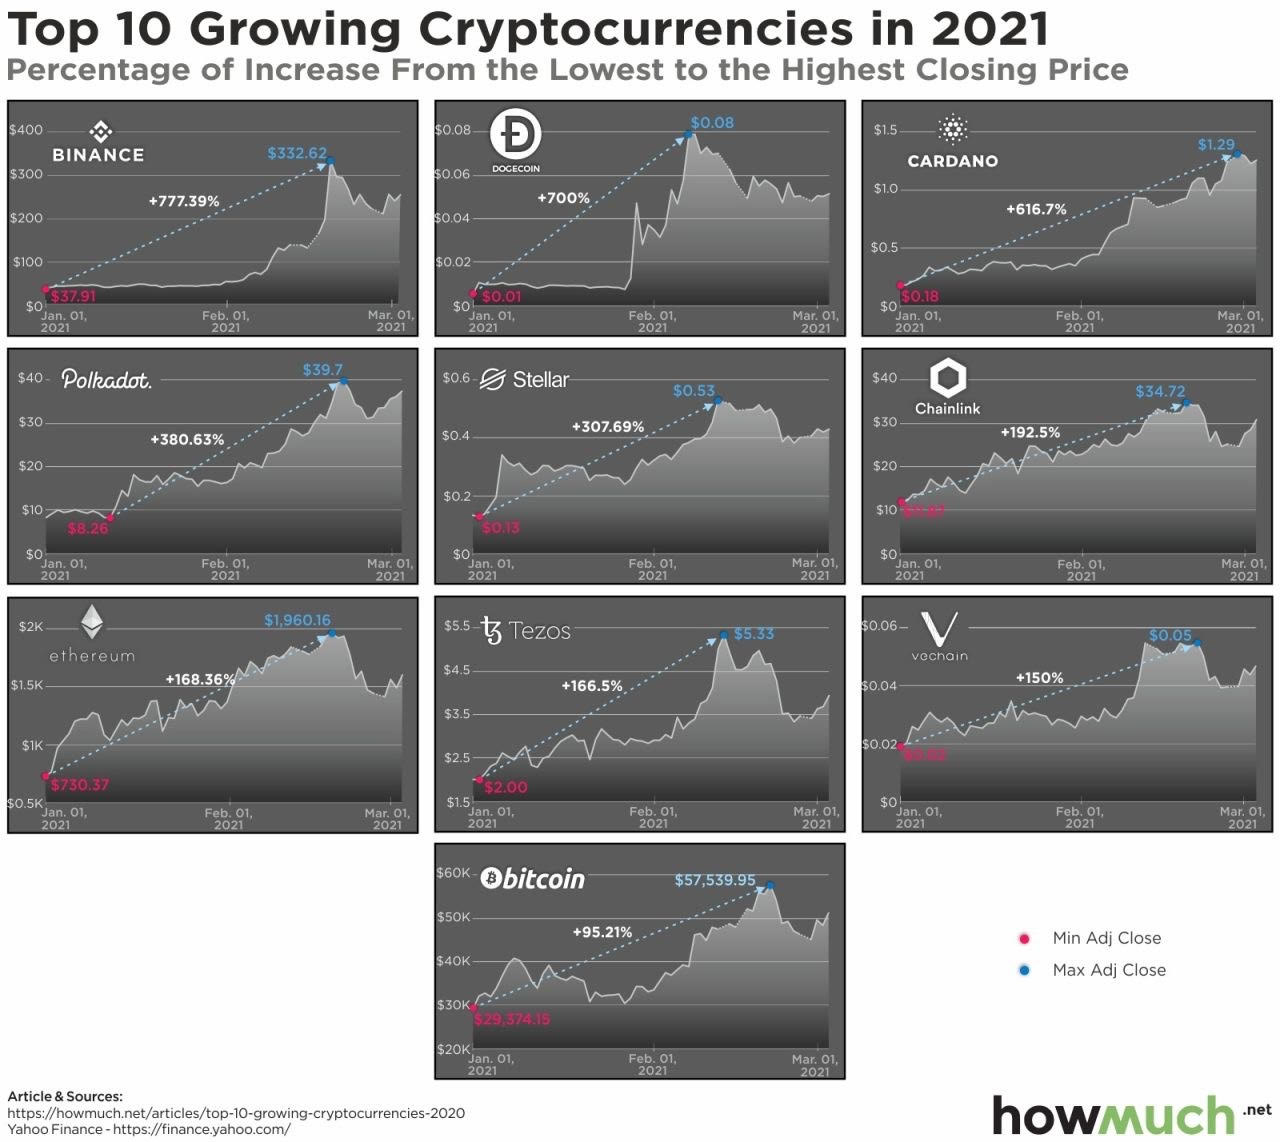 Top 10 growing cryptos in 2021